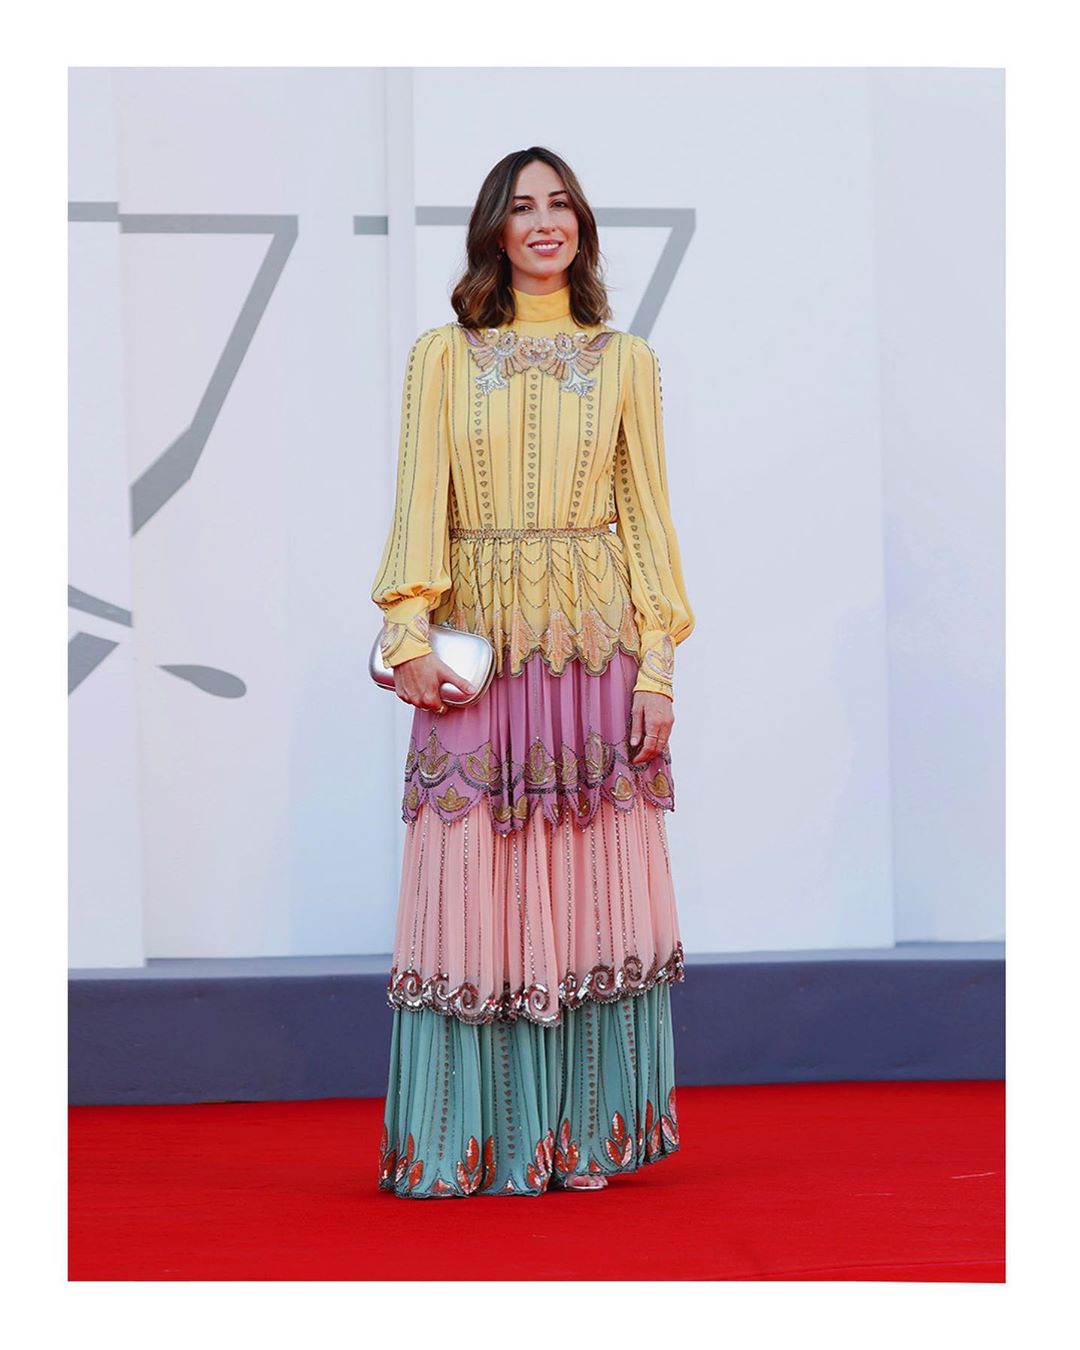 Gucci Official - Director Gia Coppola @mastergia wore #GucciCruise20 silk georgette gown with all-over multicolor crystal and sequin embroideries with high heel sandals and a metallic leather clutch d...